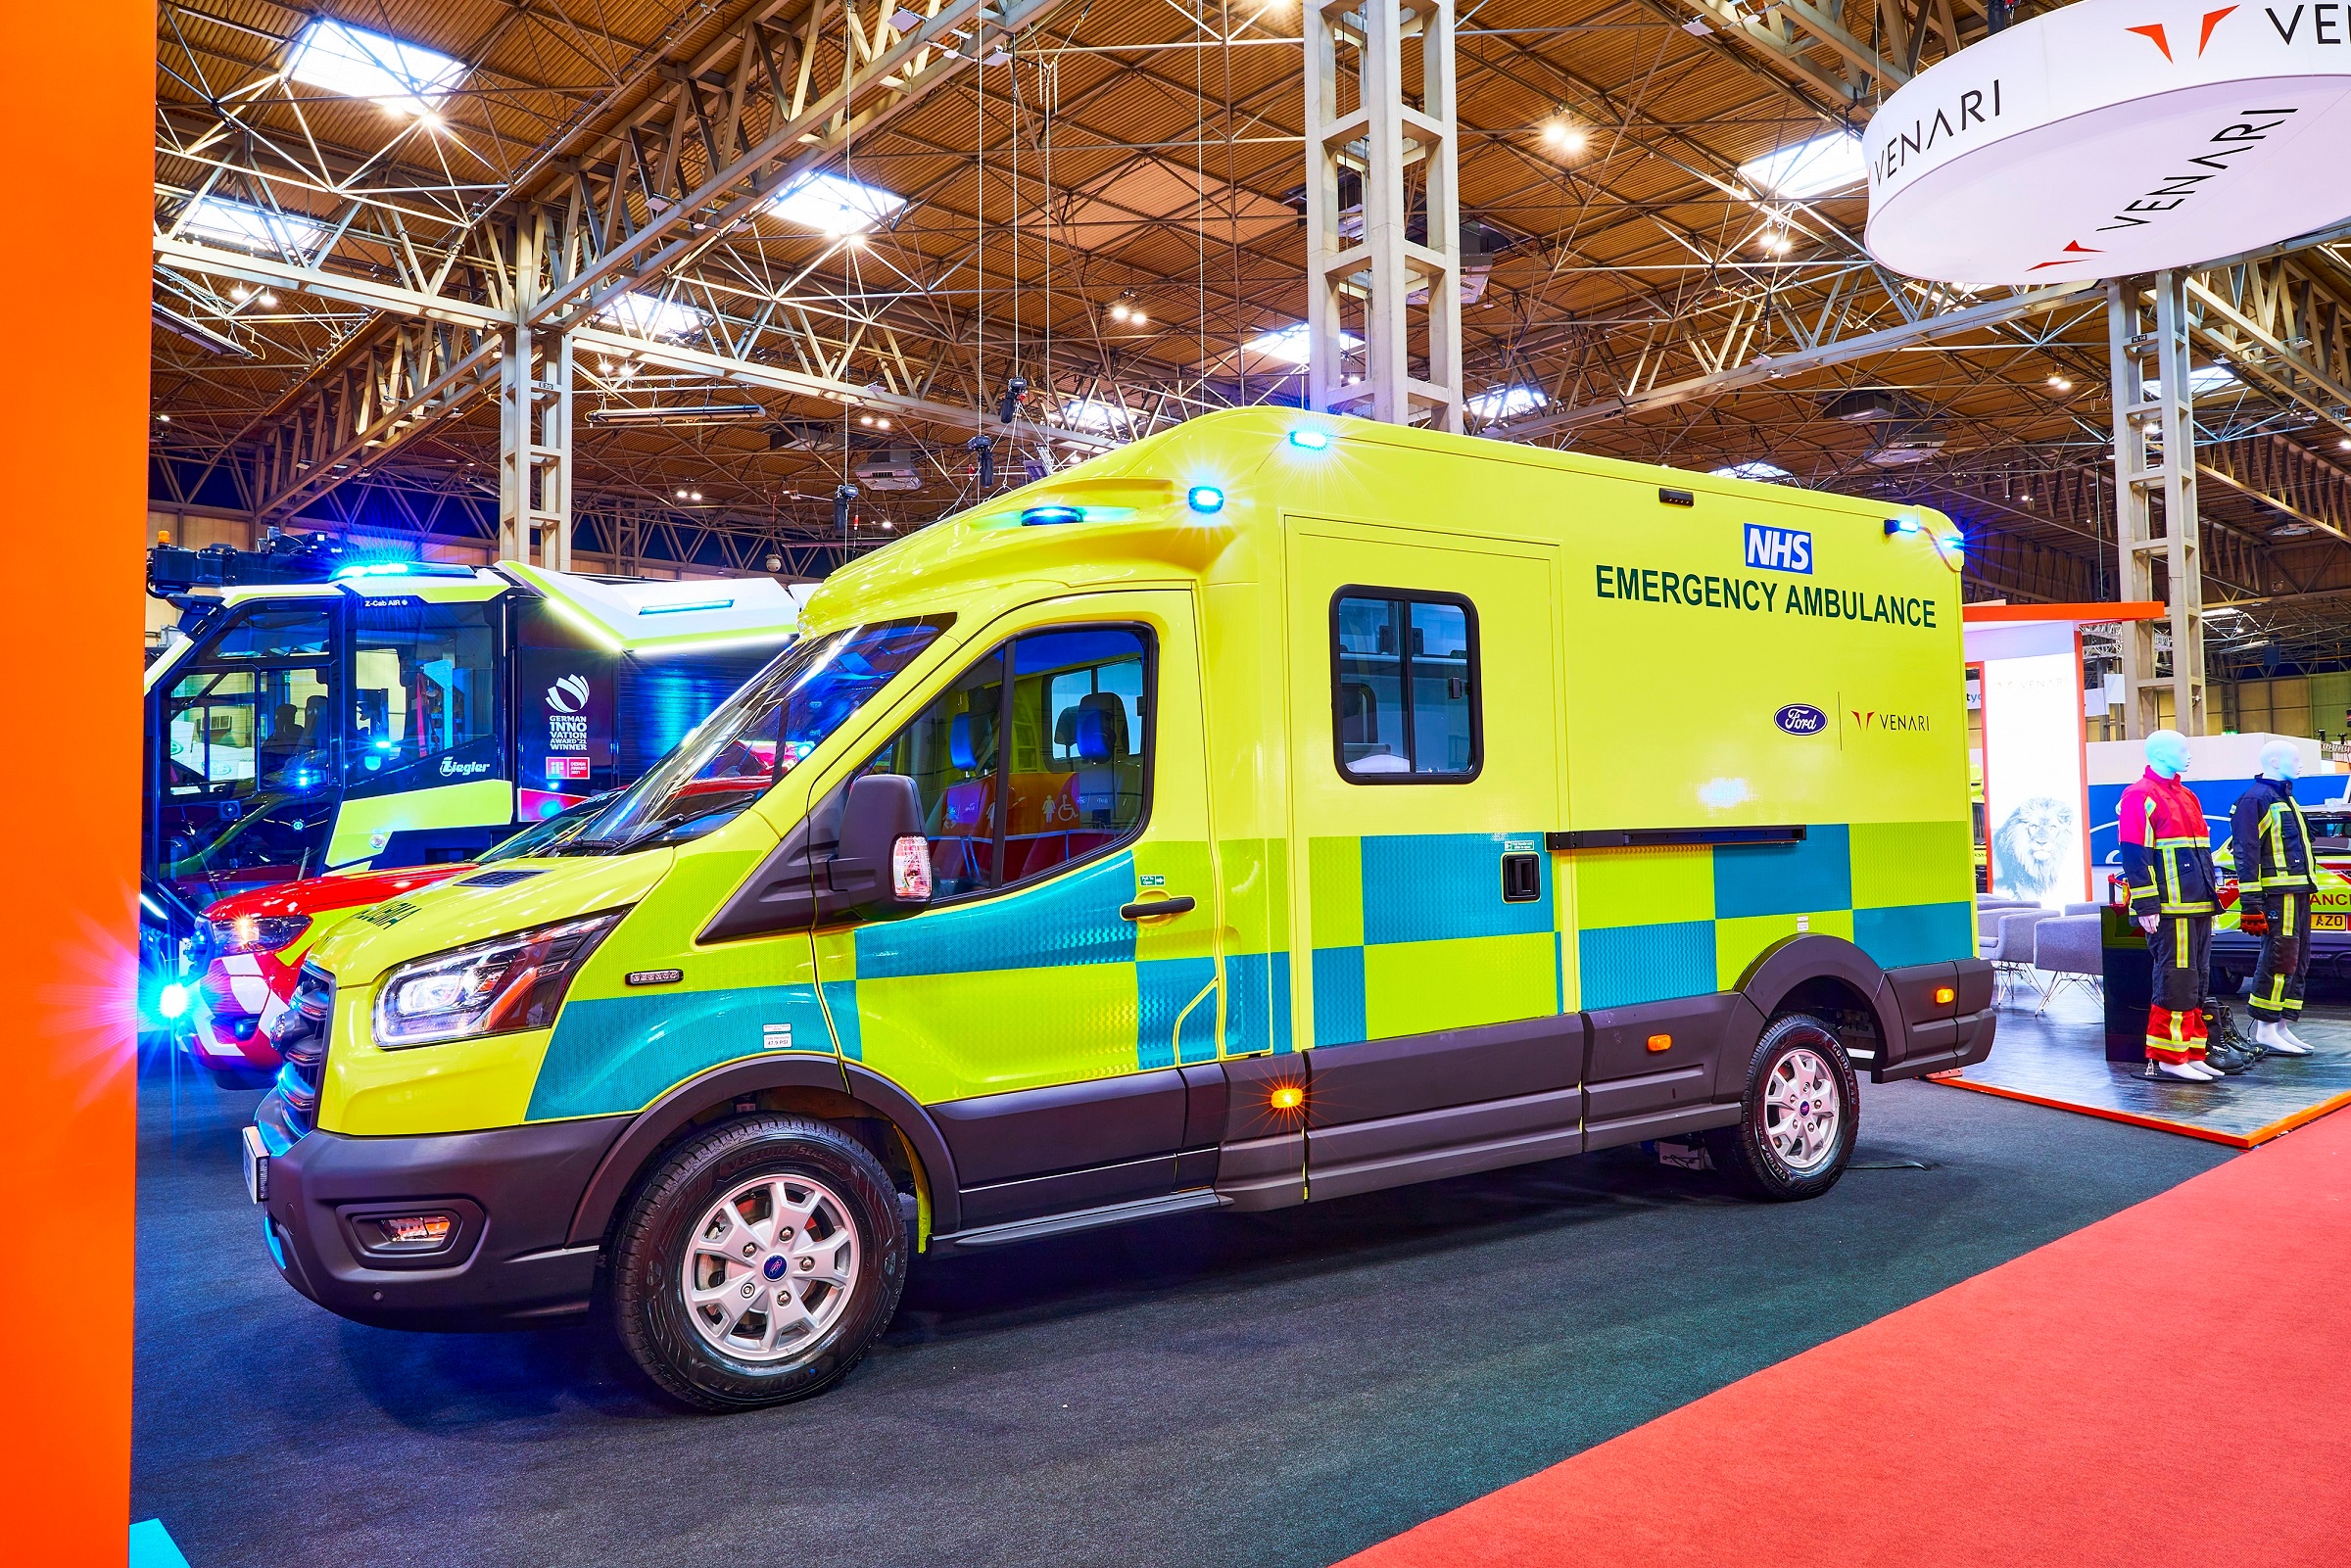 Ford Venari Alliance's State-of-the-Art Ambulance Debuts at